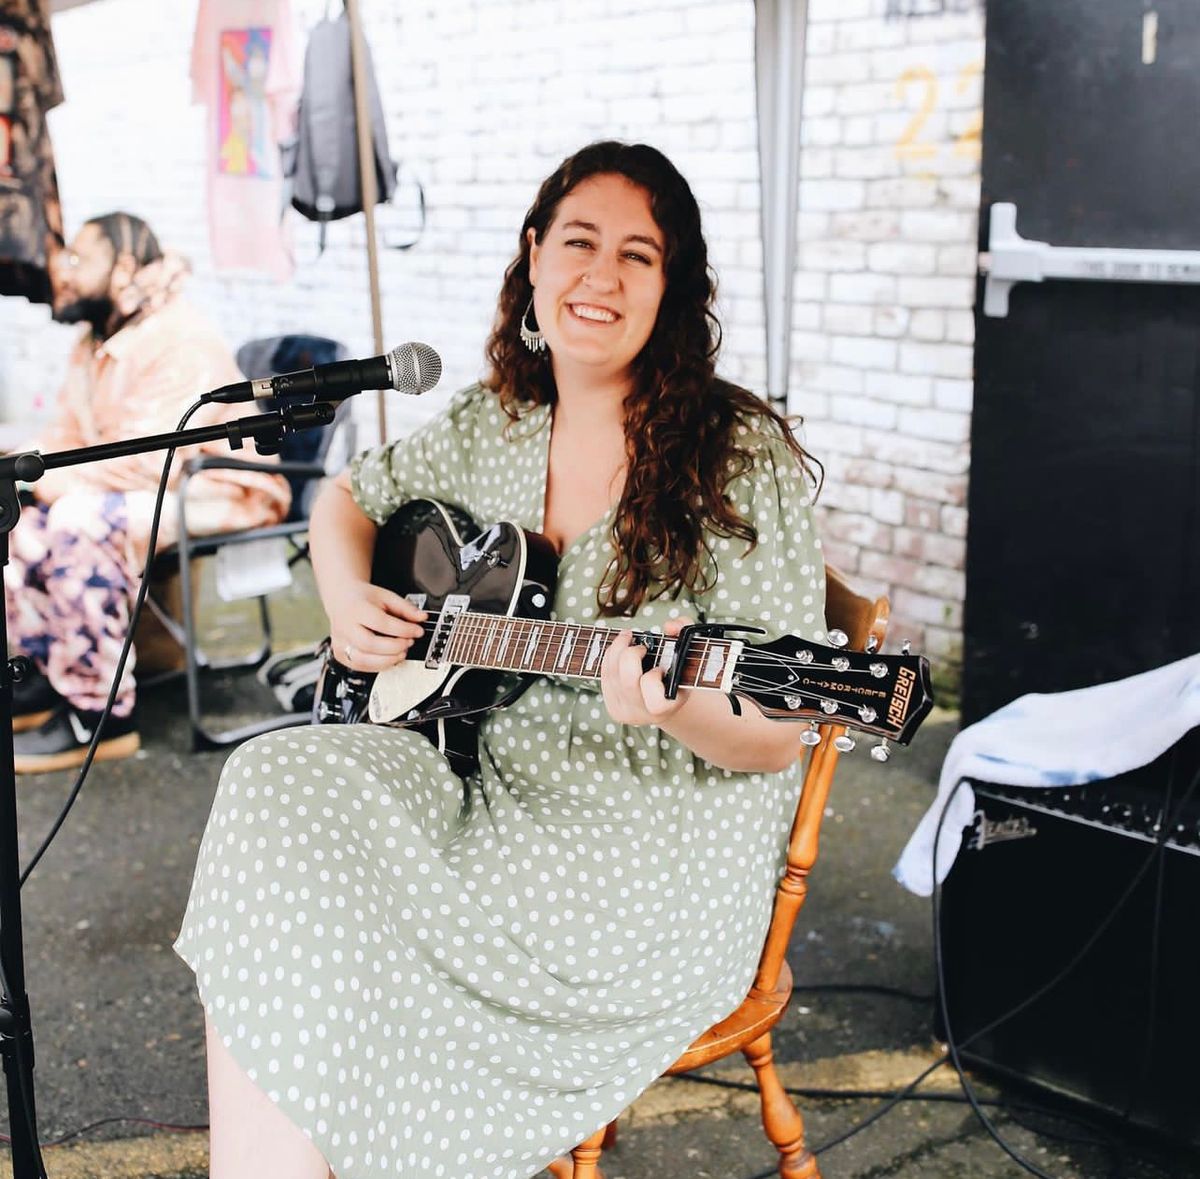 Live Music with Brenna Larsen on the Patio